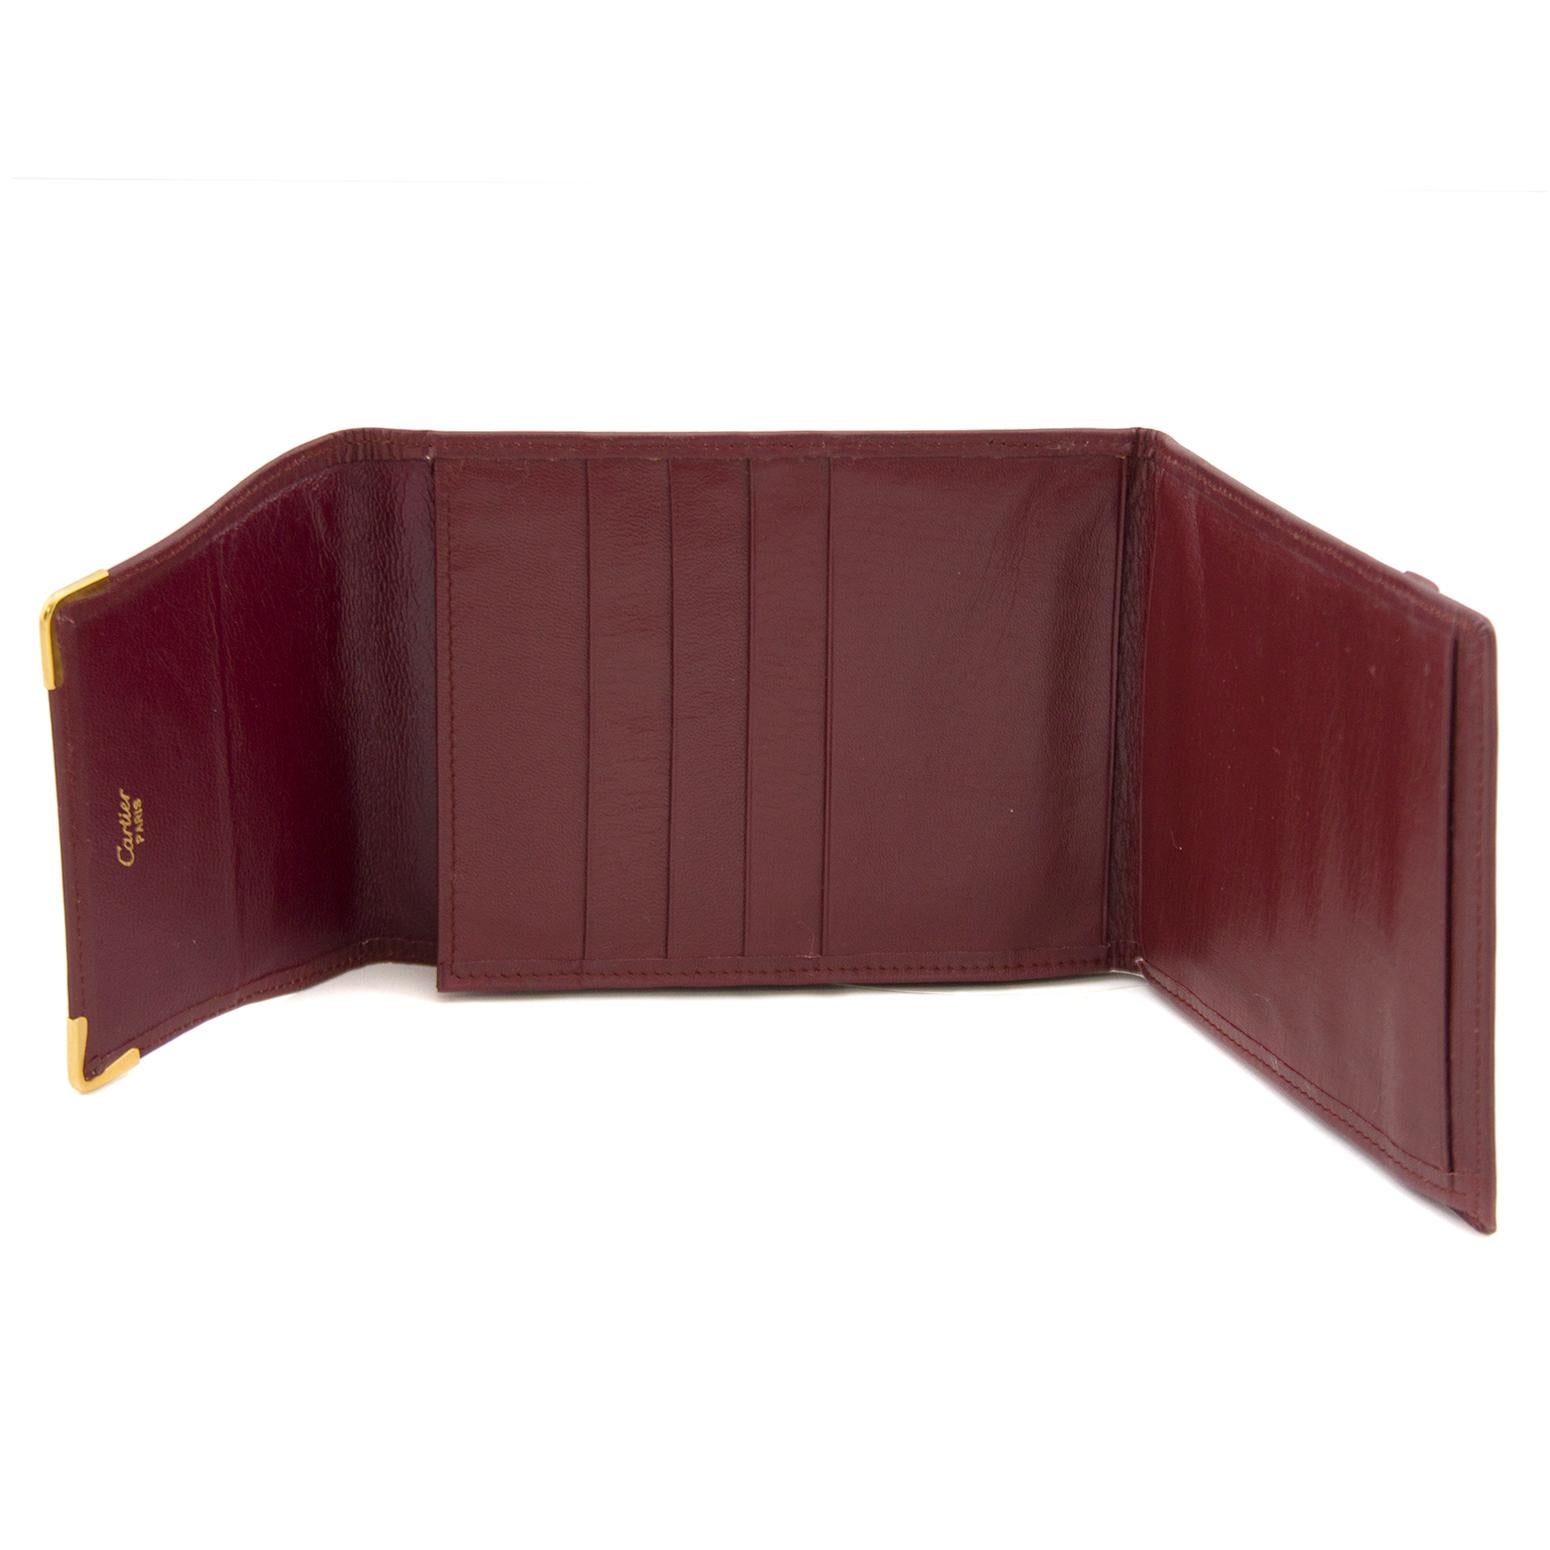 Brown 1980s Cartier Burgundy Leather Billfold Wallet With Fold-Over Closure